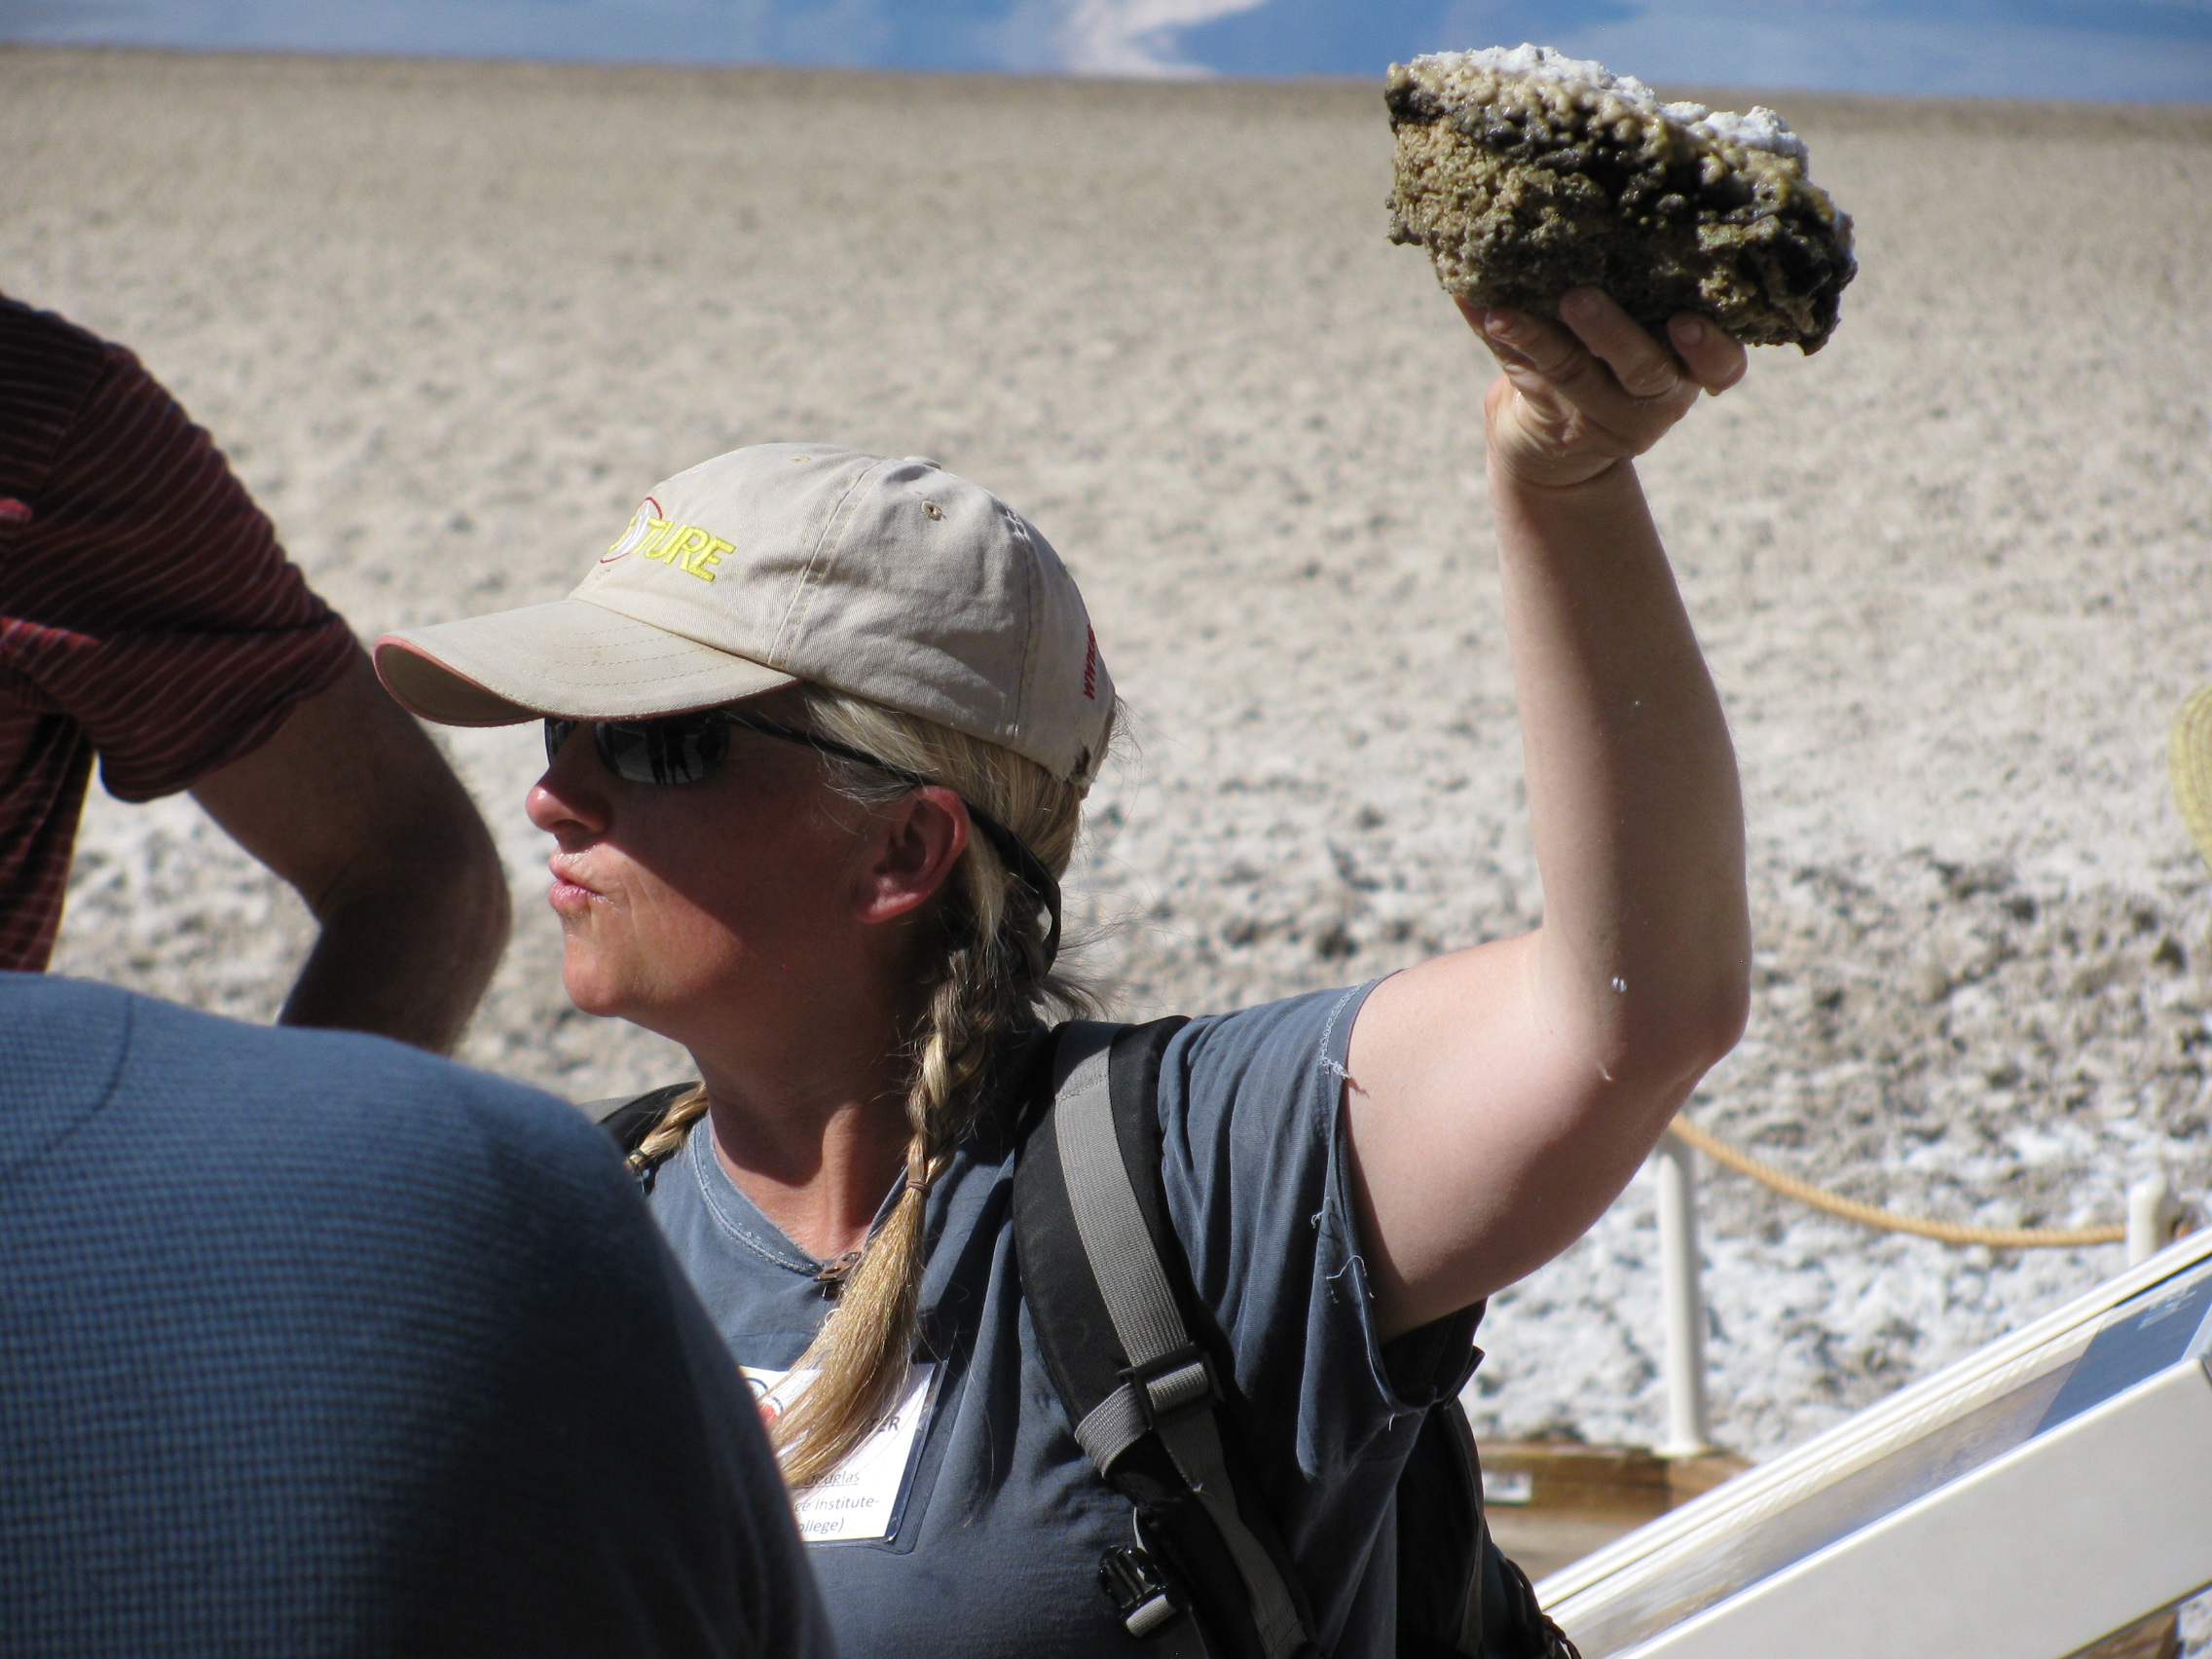 Dr. Susanne Douglas talks about microbial research in the Badwater Basin.